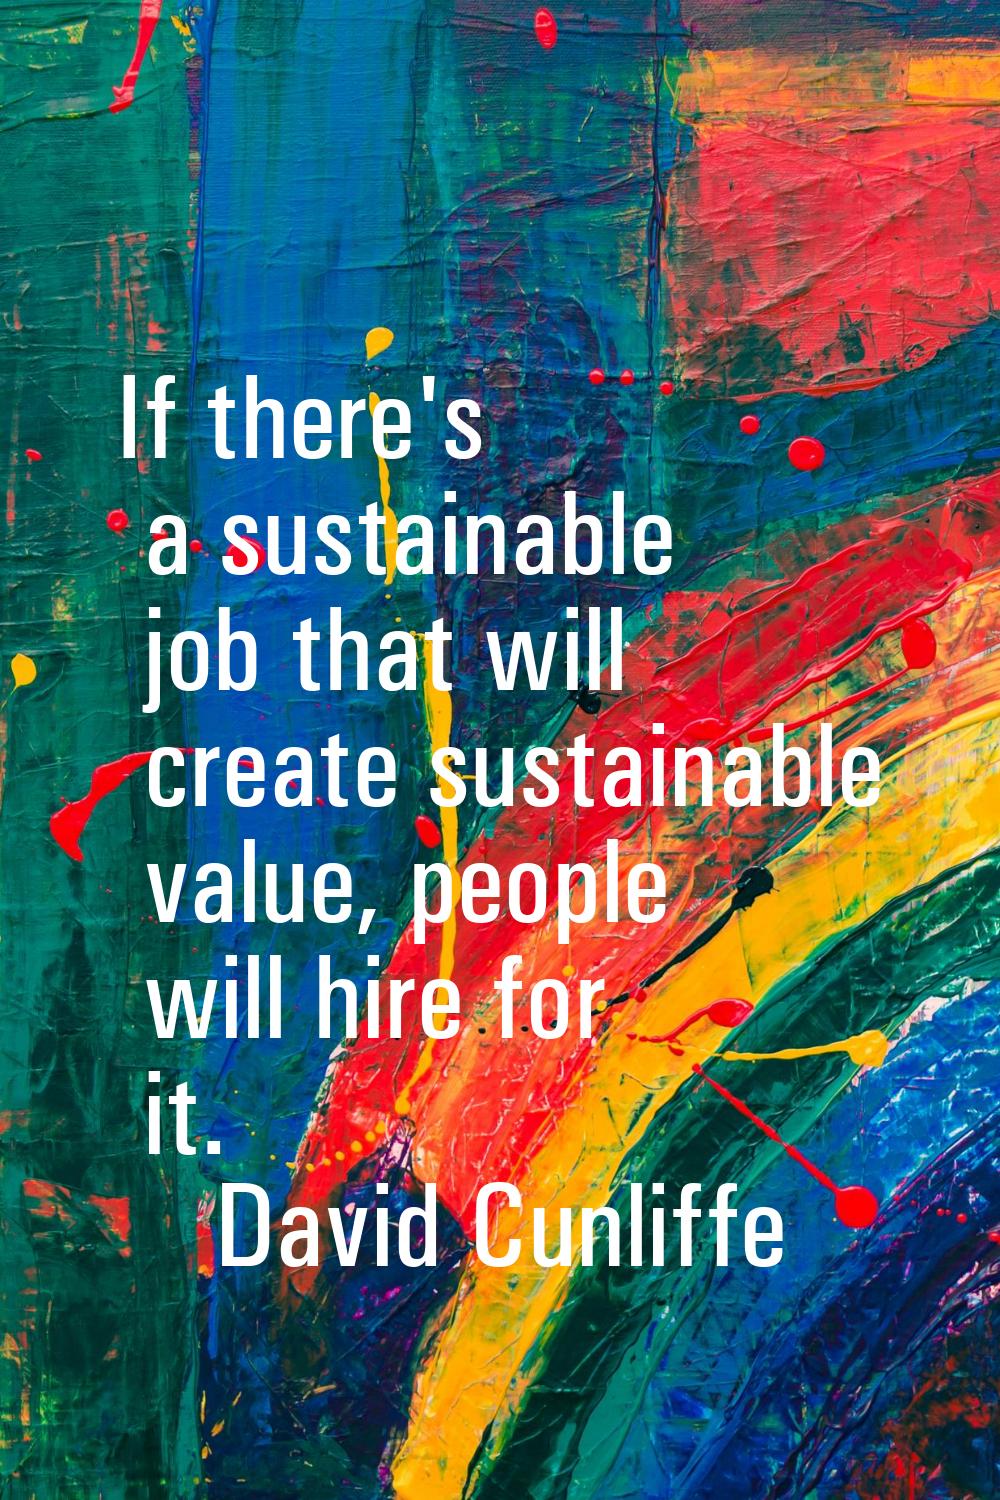 If there's a sustainable job that will create sustainable value, people will hire for it.